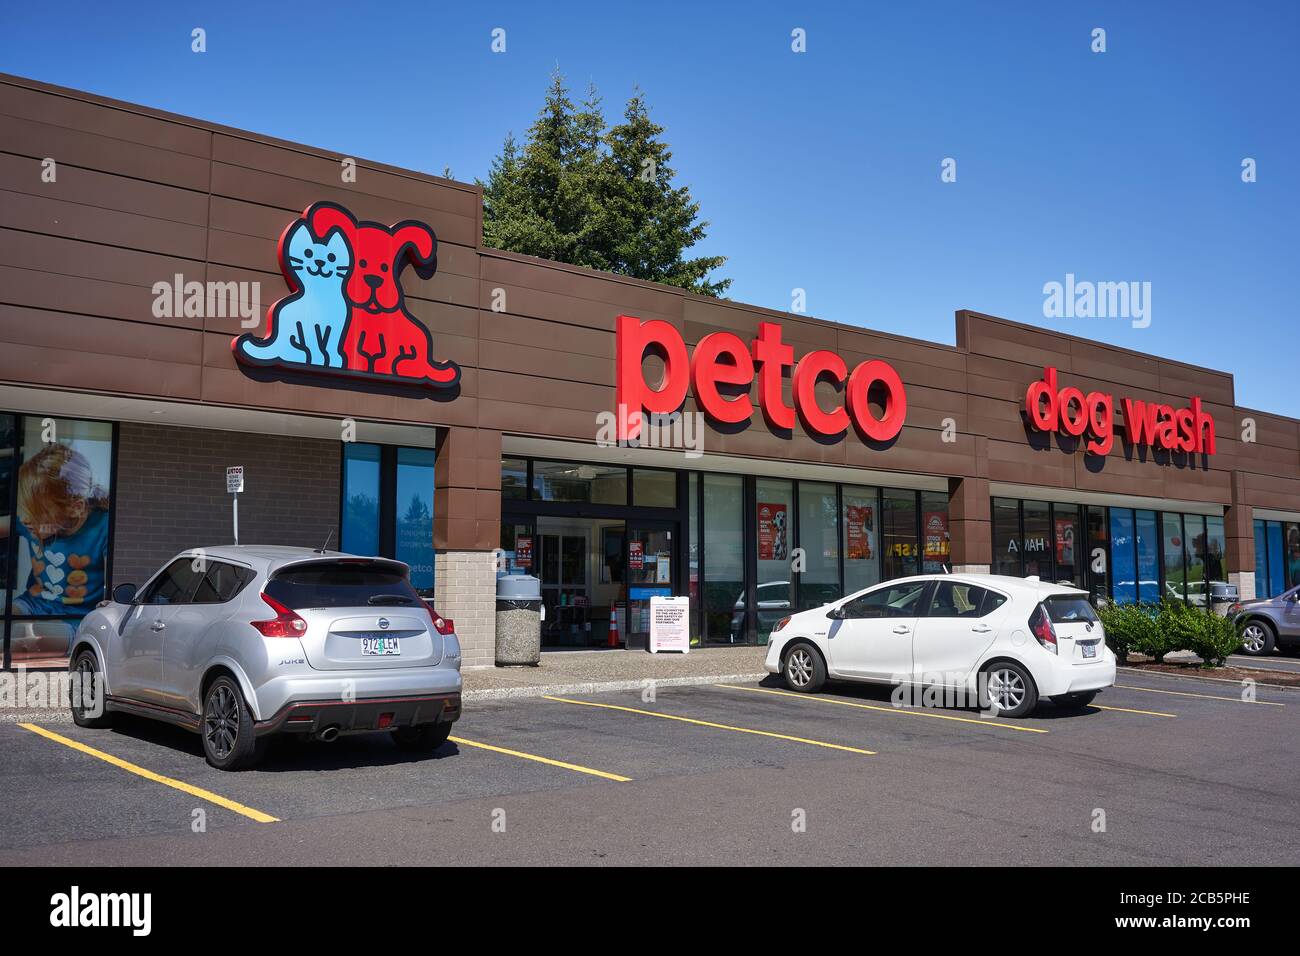 A Petco store in Tigard, Oregon, seen on Monday, August 10, 2020. Petco Animal Supplies, Inc. is an American pet retailer in the United States. Stock Photo